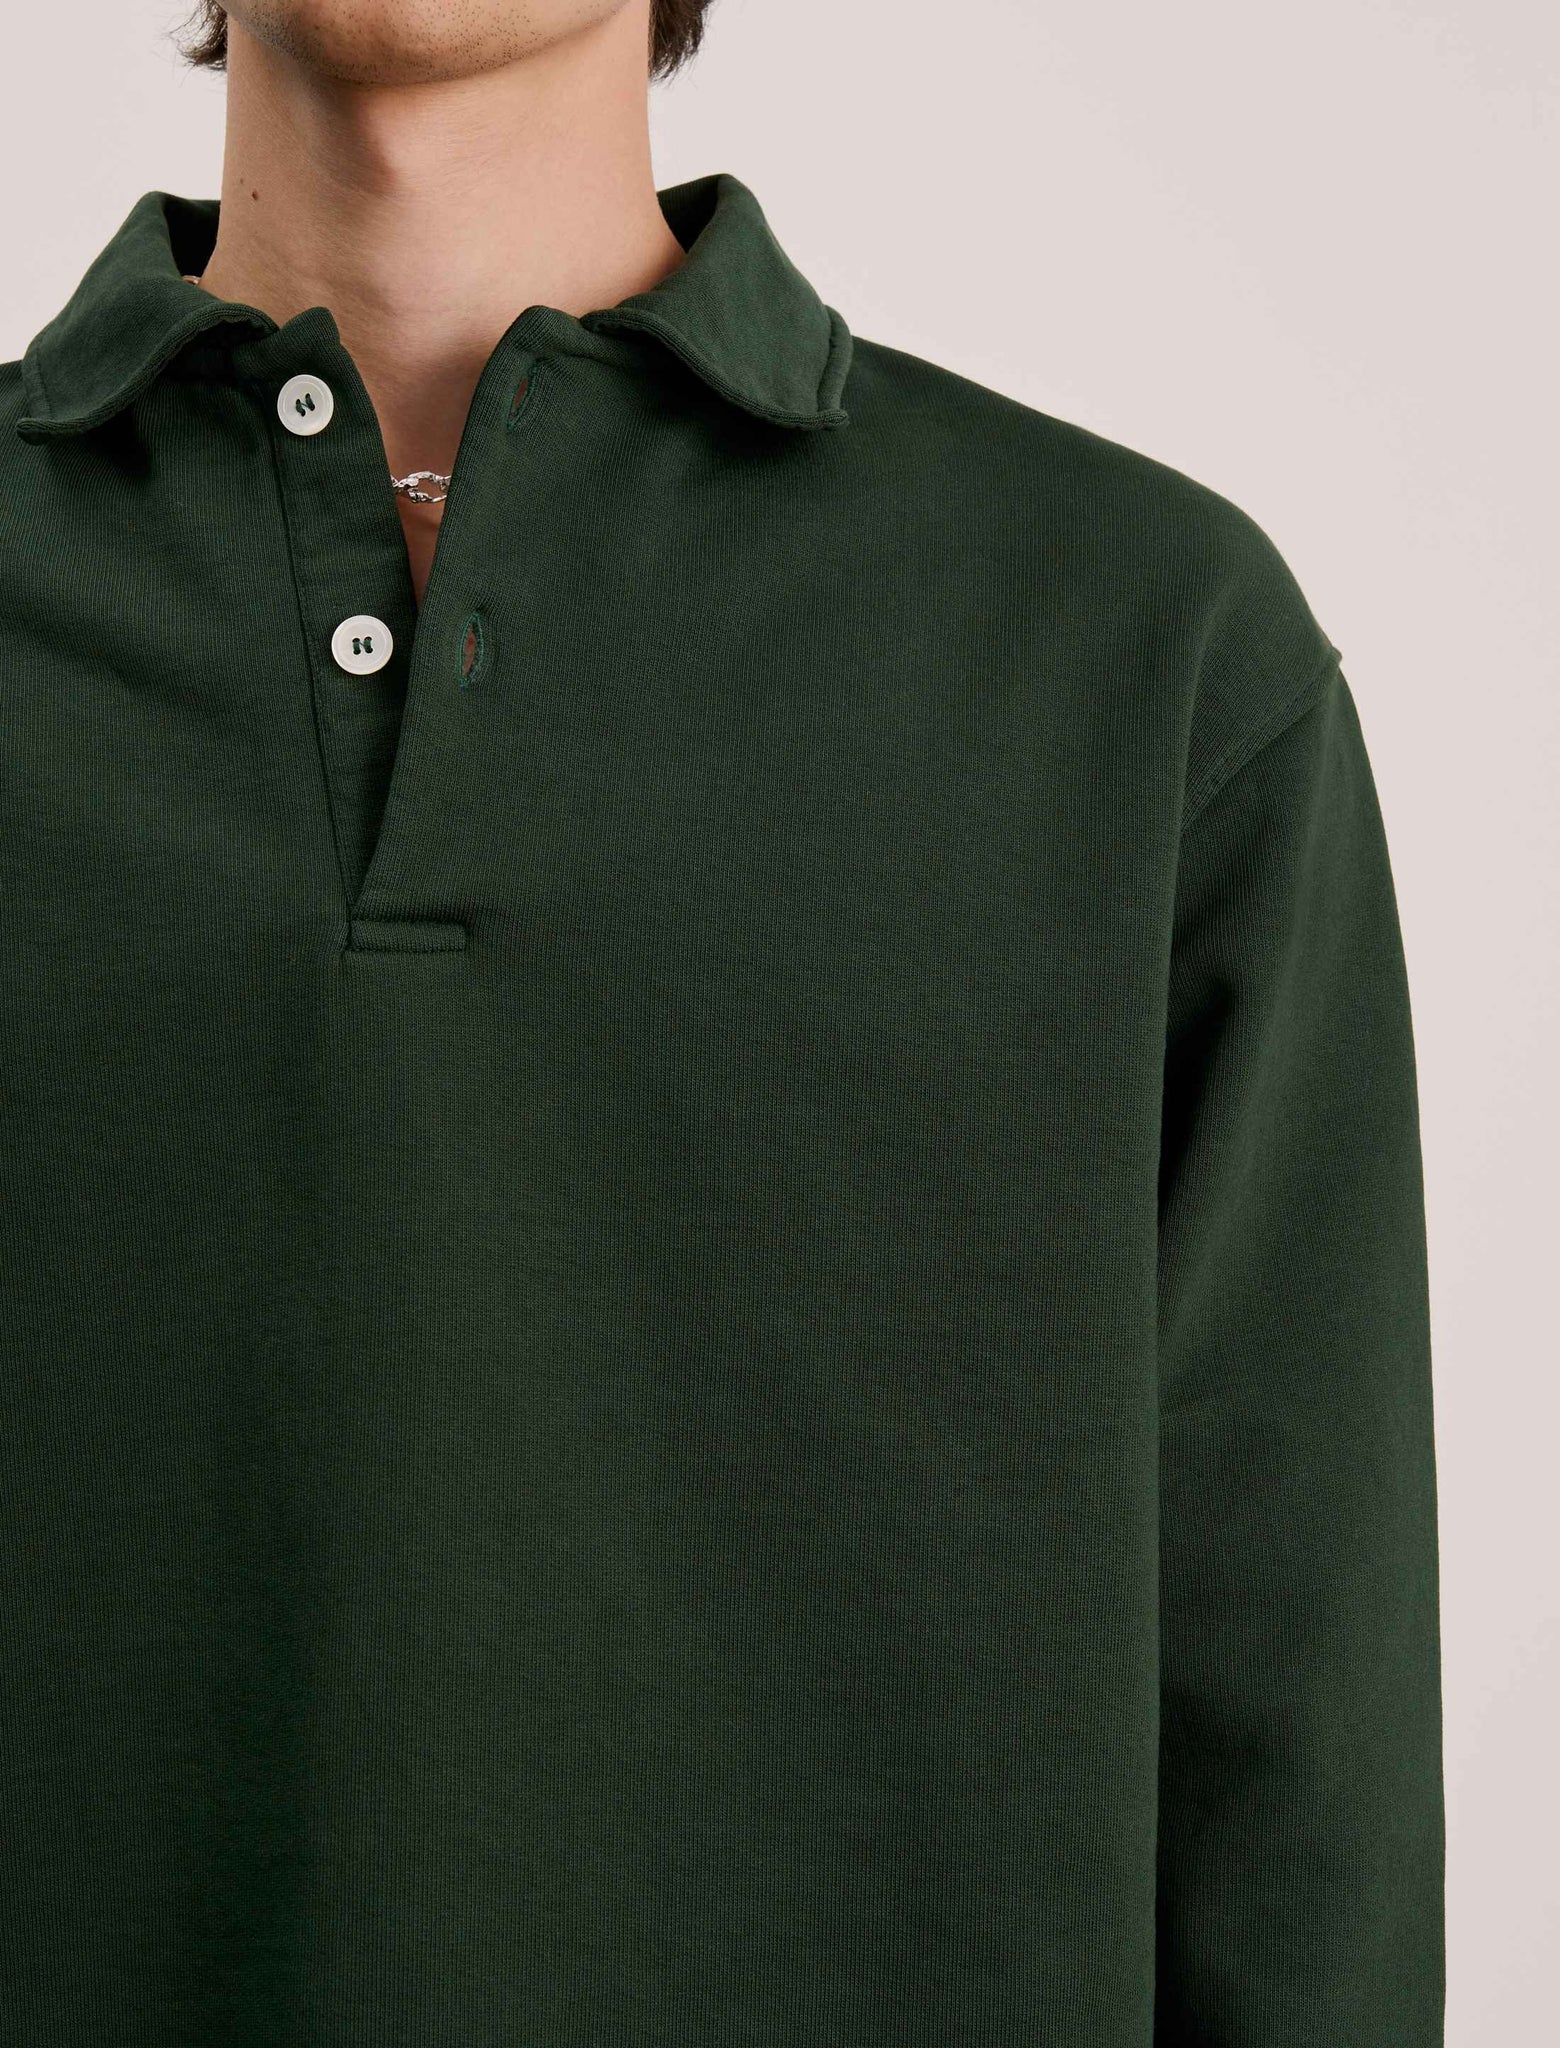 ANOTHER Polo Shirt 1.0, Evergreen